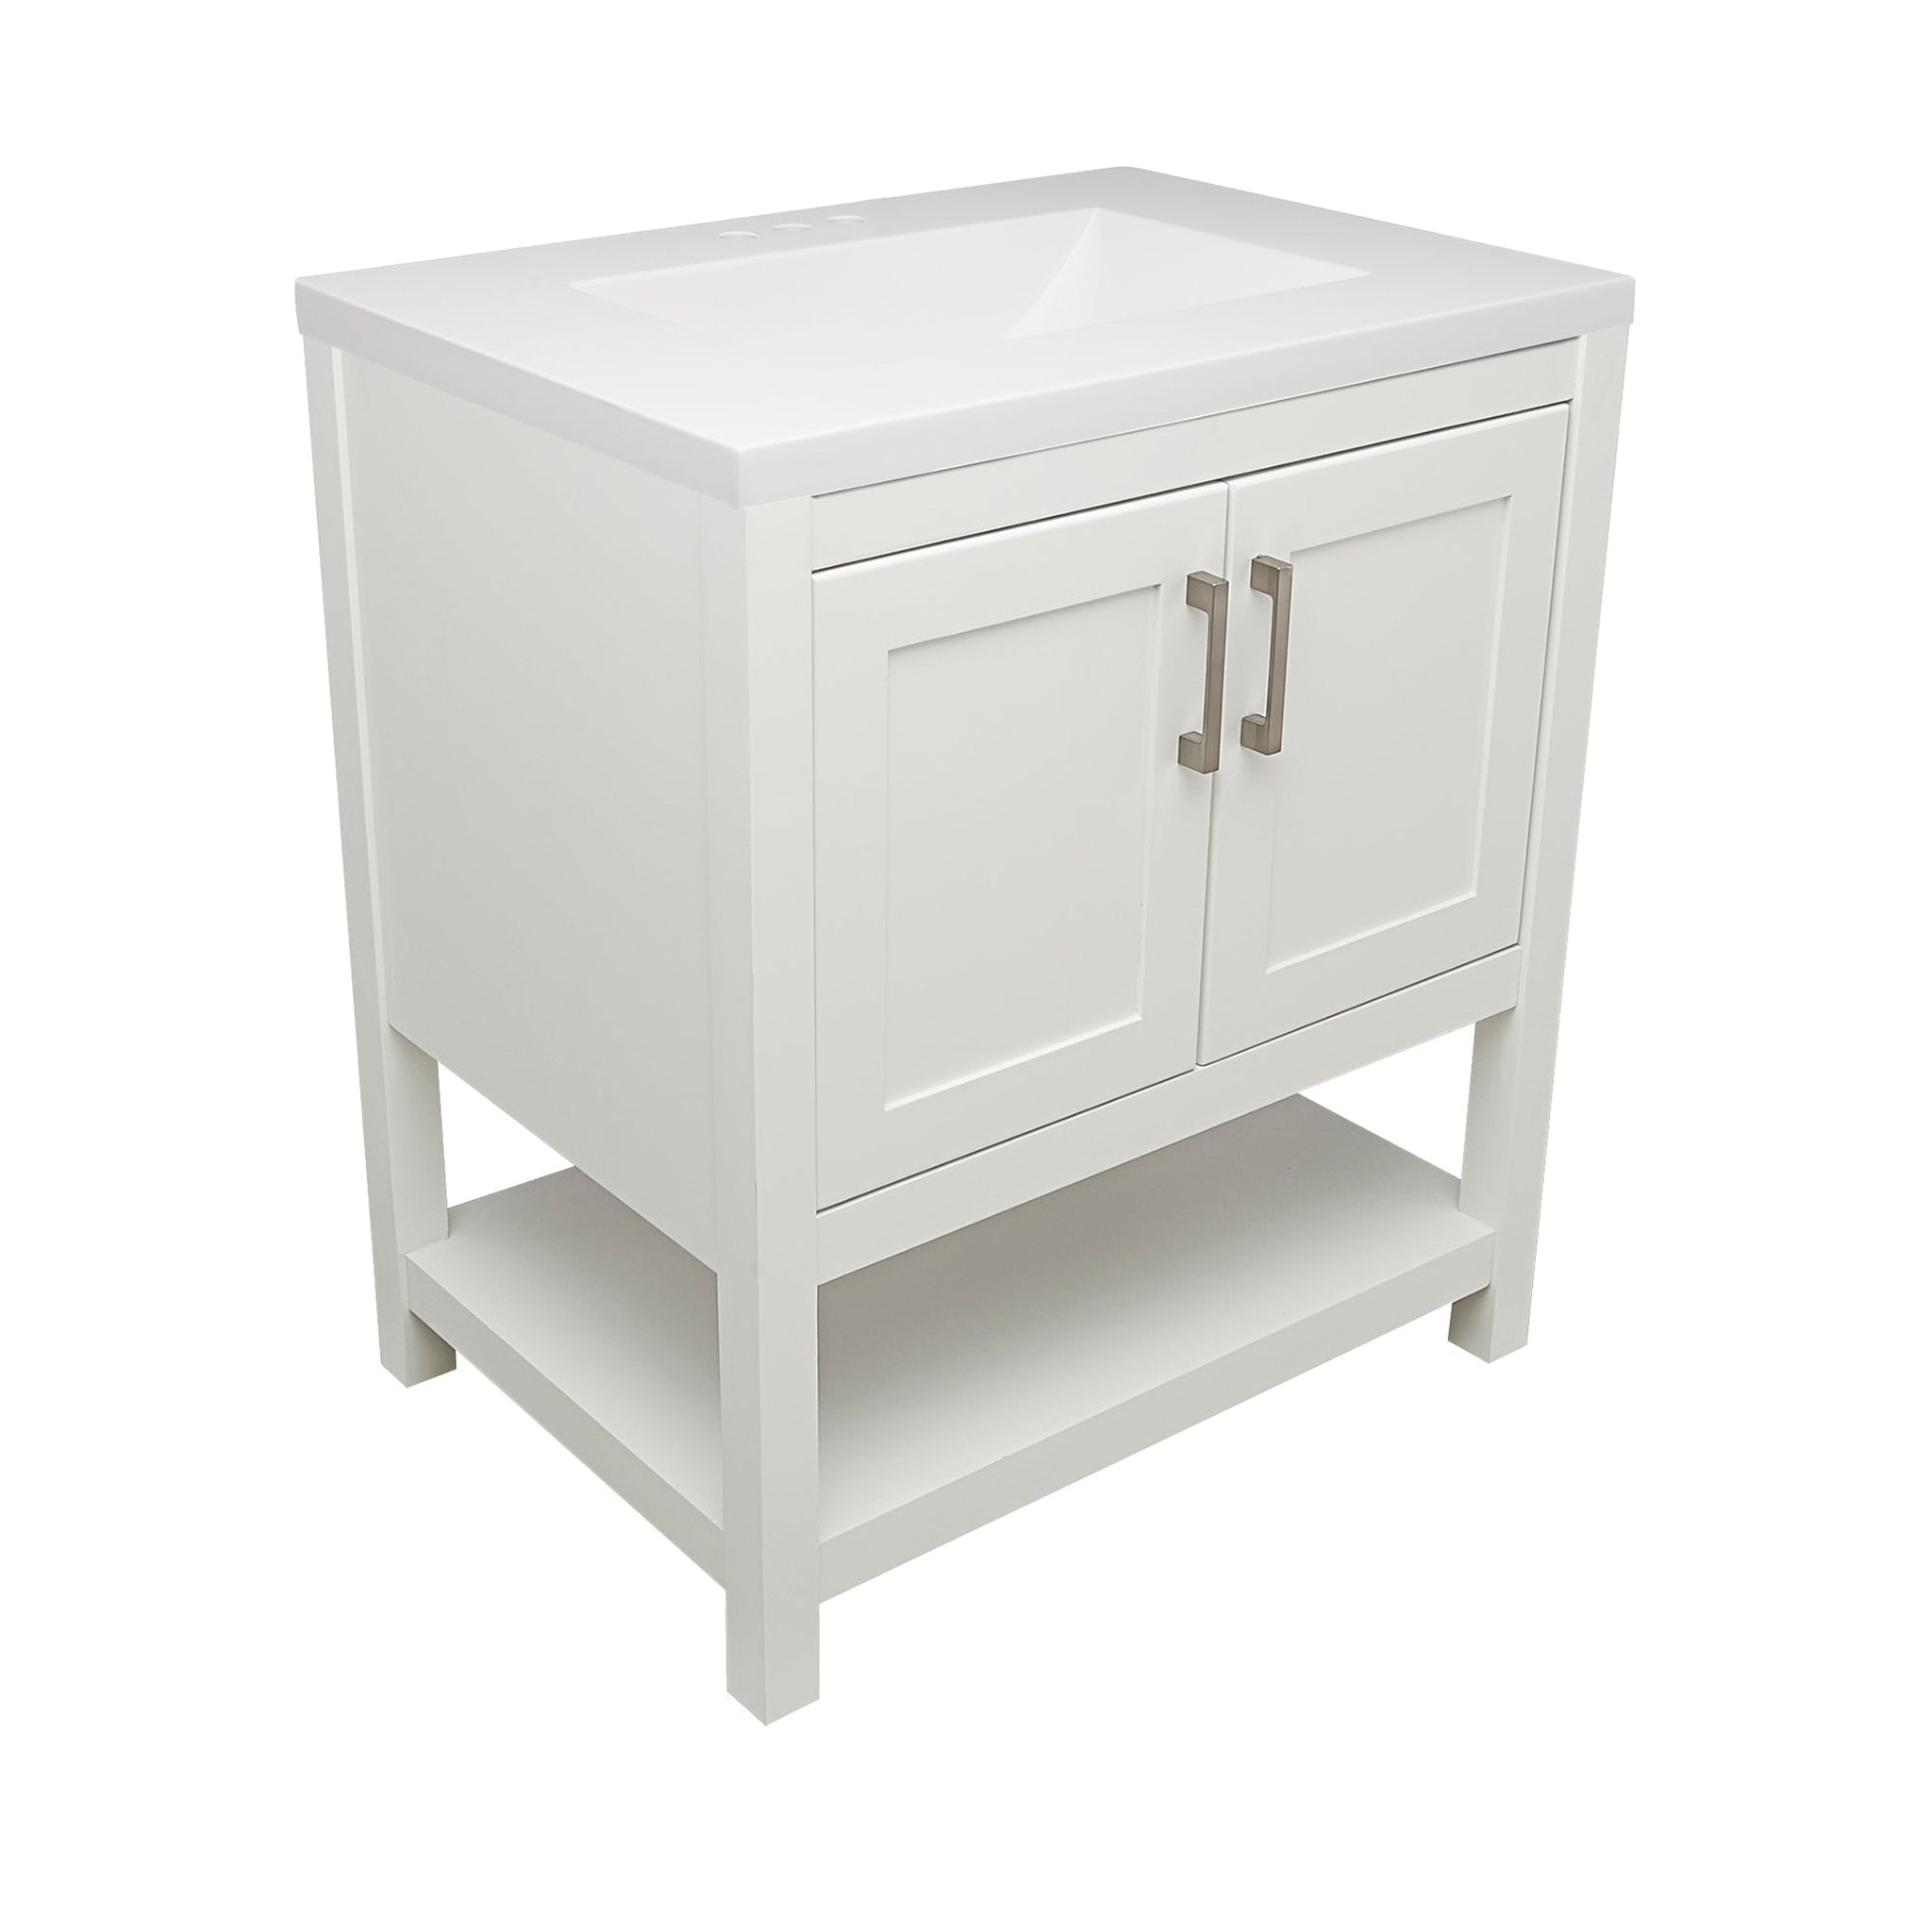 Ella's Bubbles, Ella's Bubbles Taos 31" White Bathroom Vanity With White Cultured Marble Top and Sink